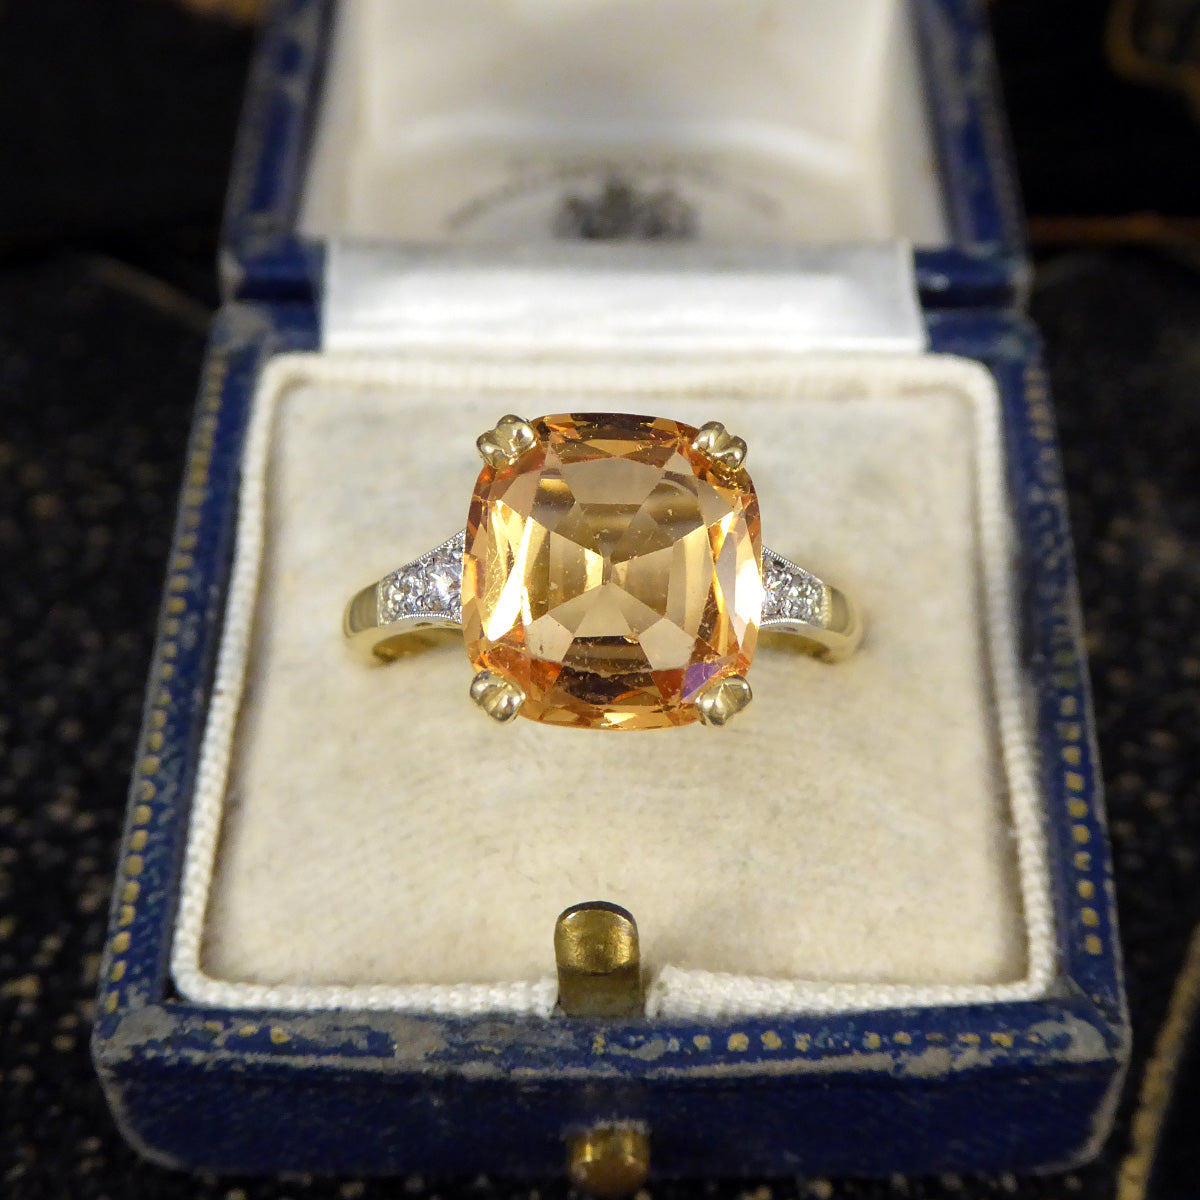 5.12ct Imperial Topaz Ring with Diamond Set Tapered Shoulders in 18ct Yellow Gold